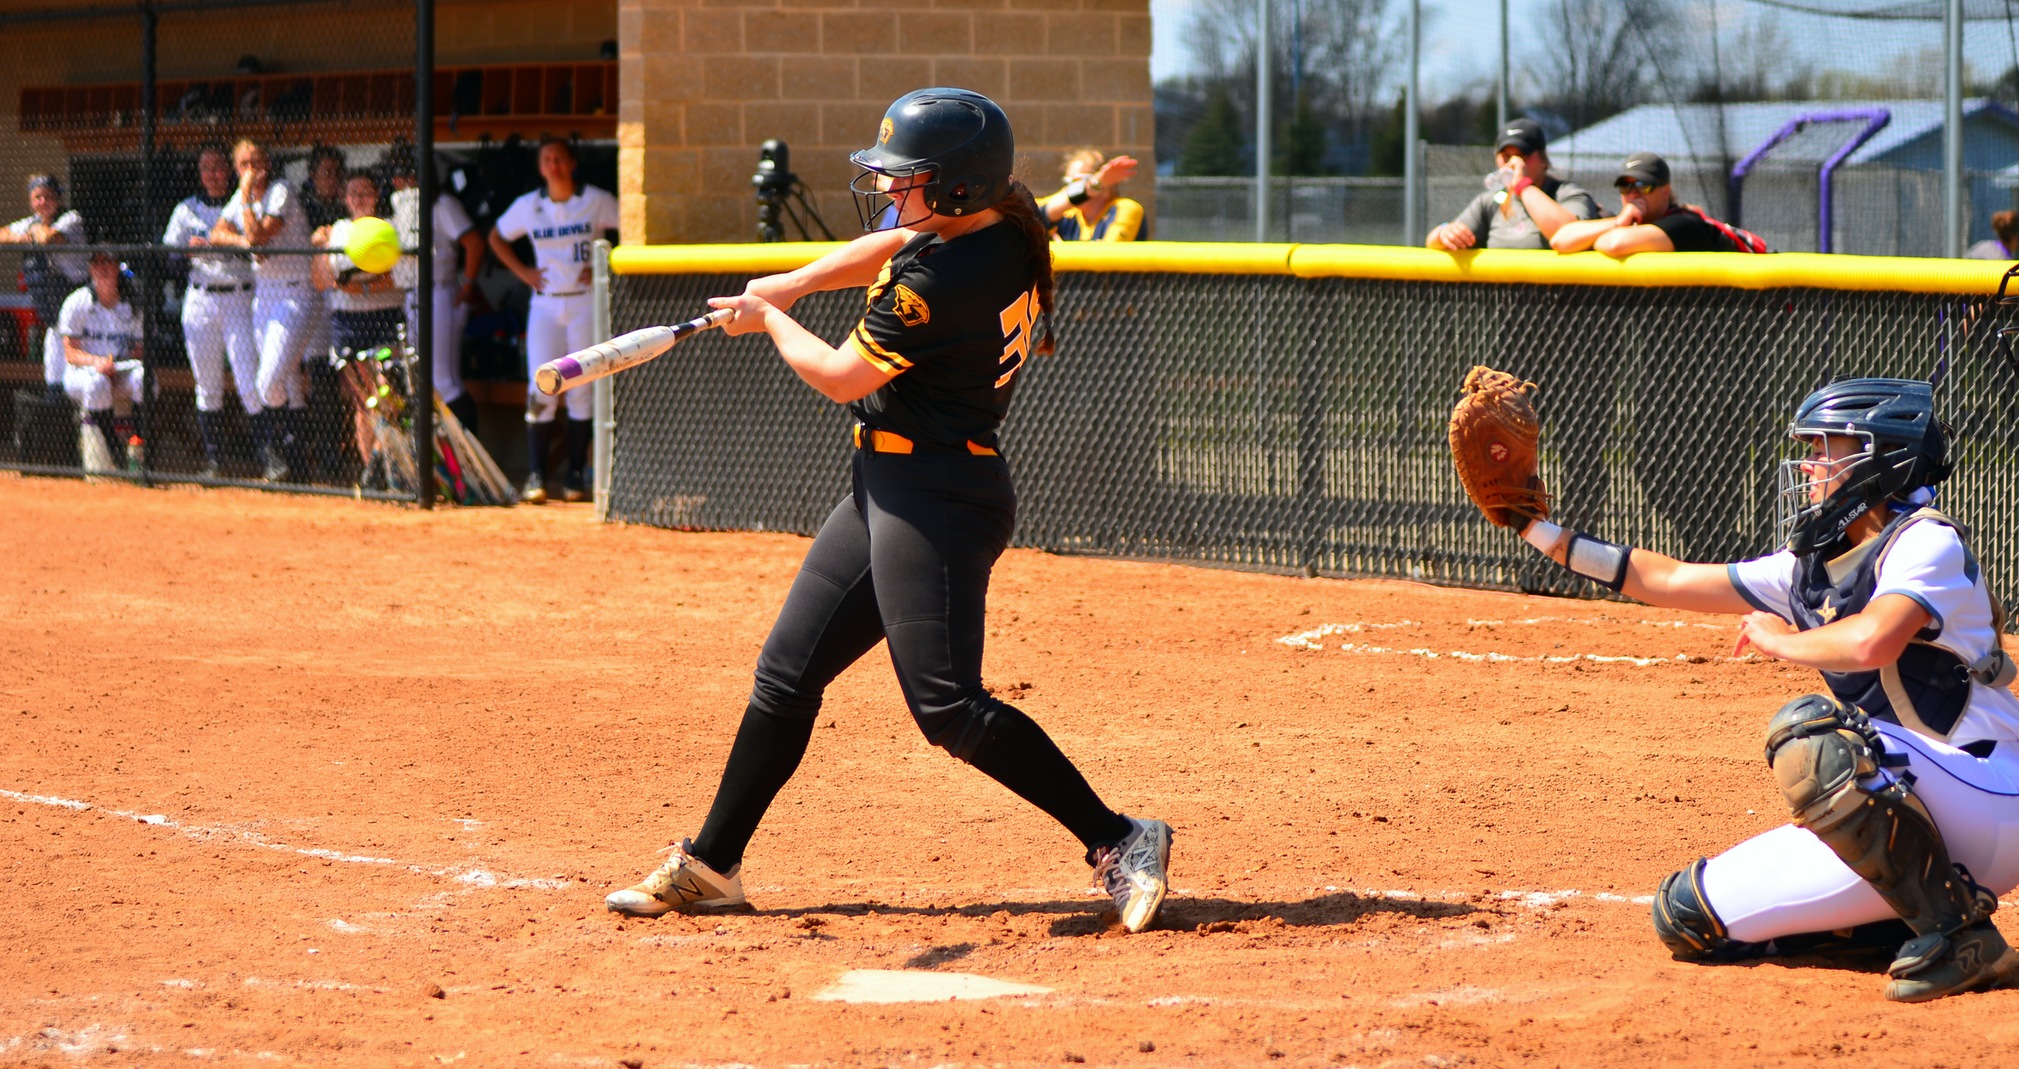 Claire Petrus starred at the plate and in the pitcher's circle against the Blue Devils.